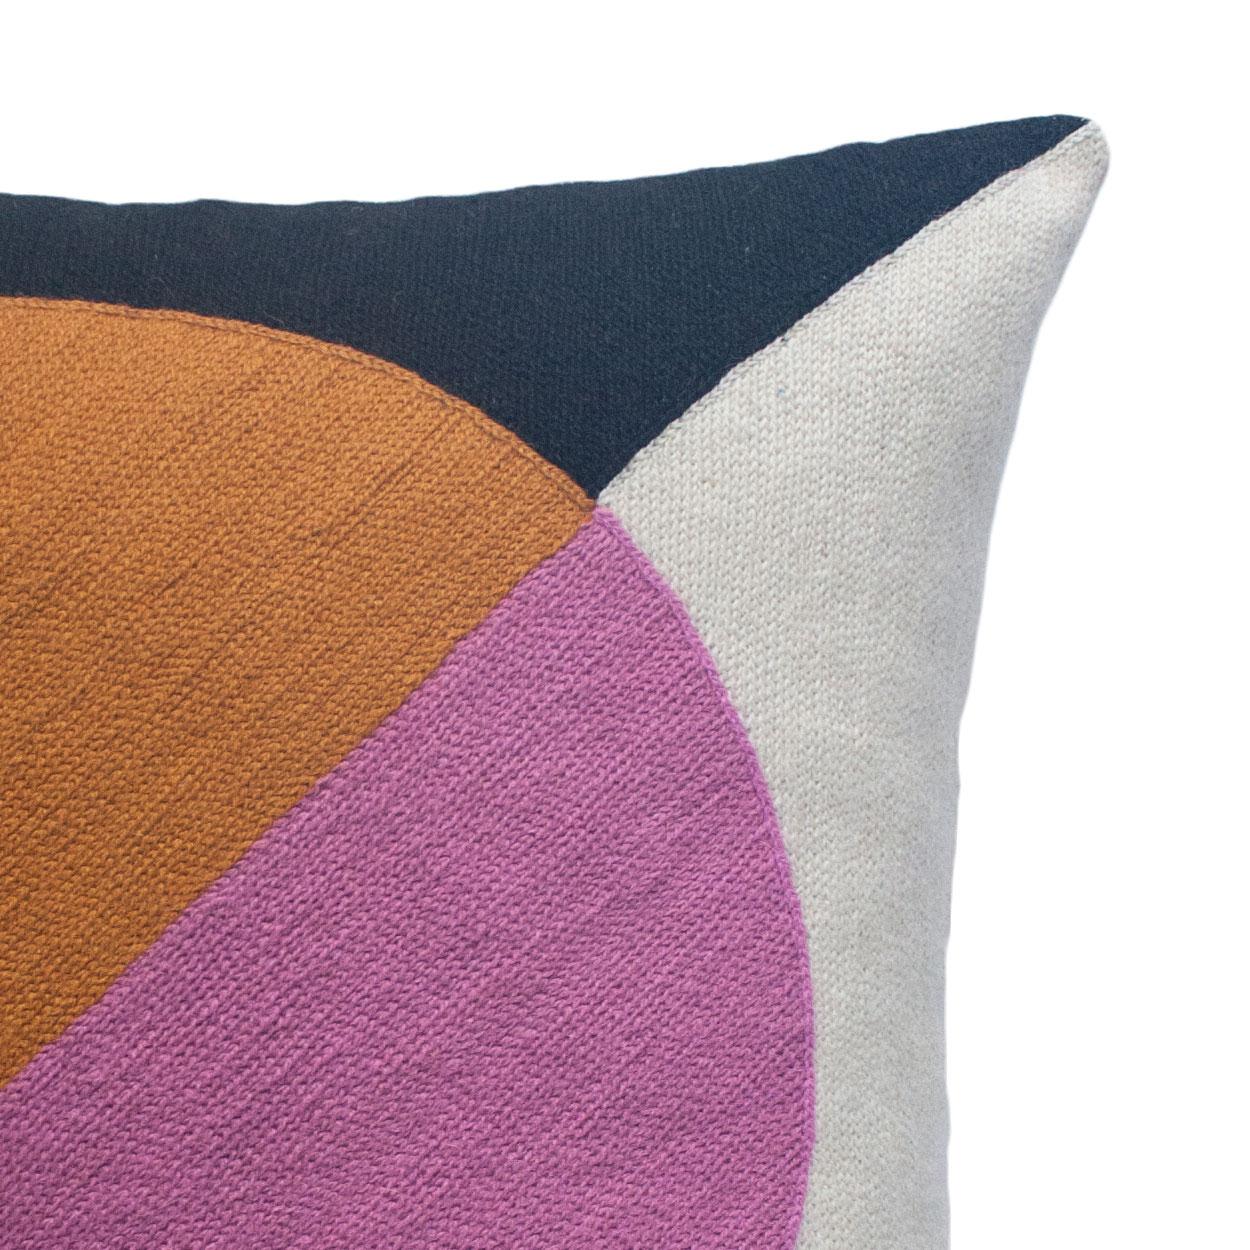 Indian Geometric Madrid Circle Hand Embroidered Modern Throw Pillow Cover